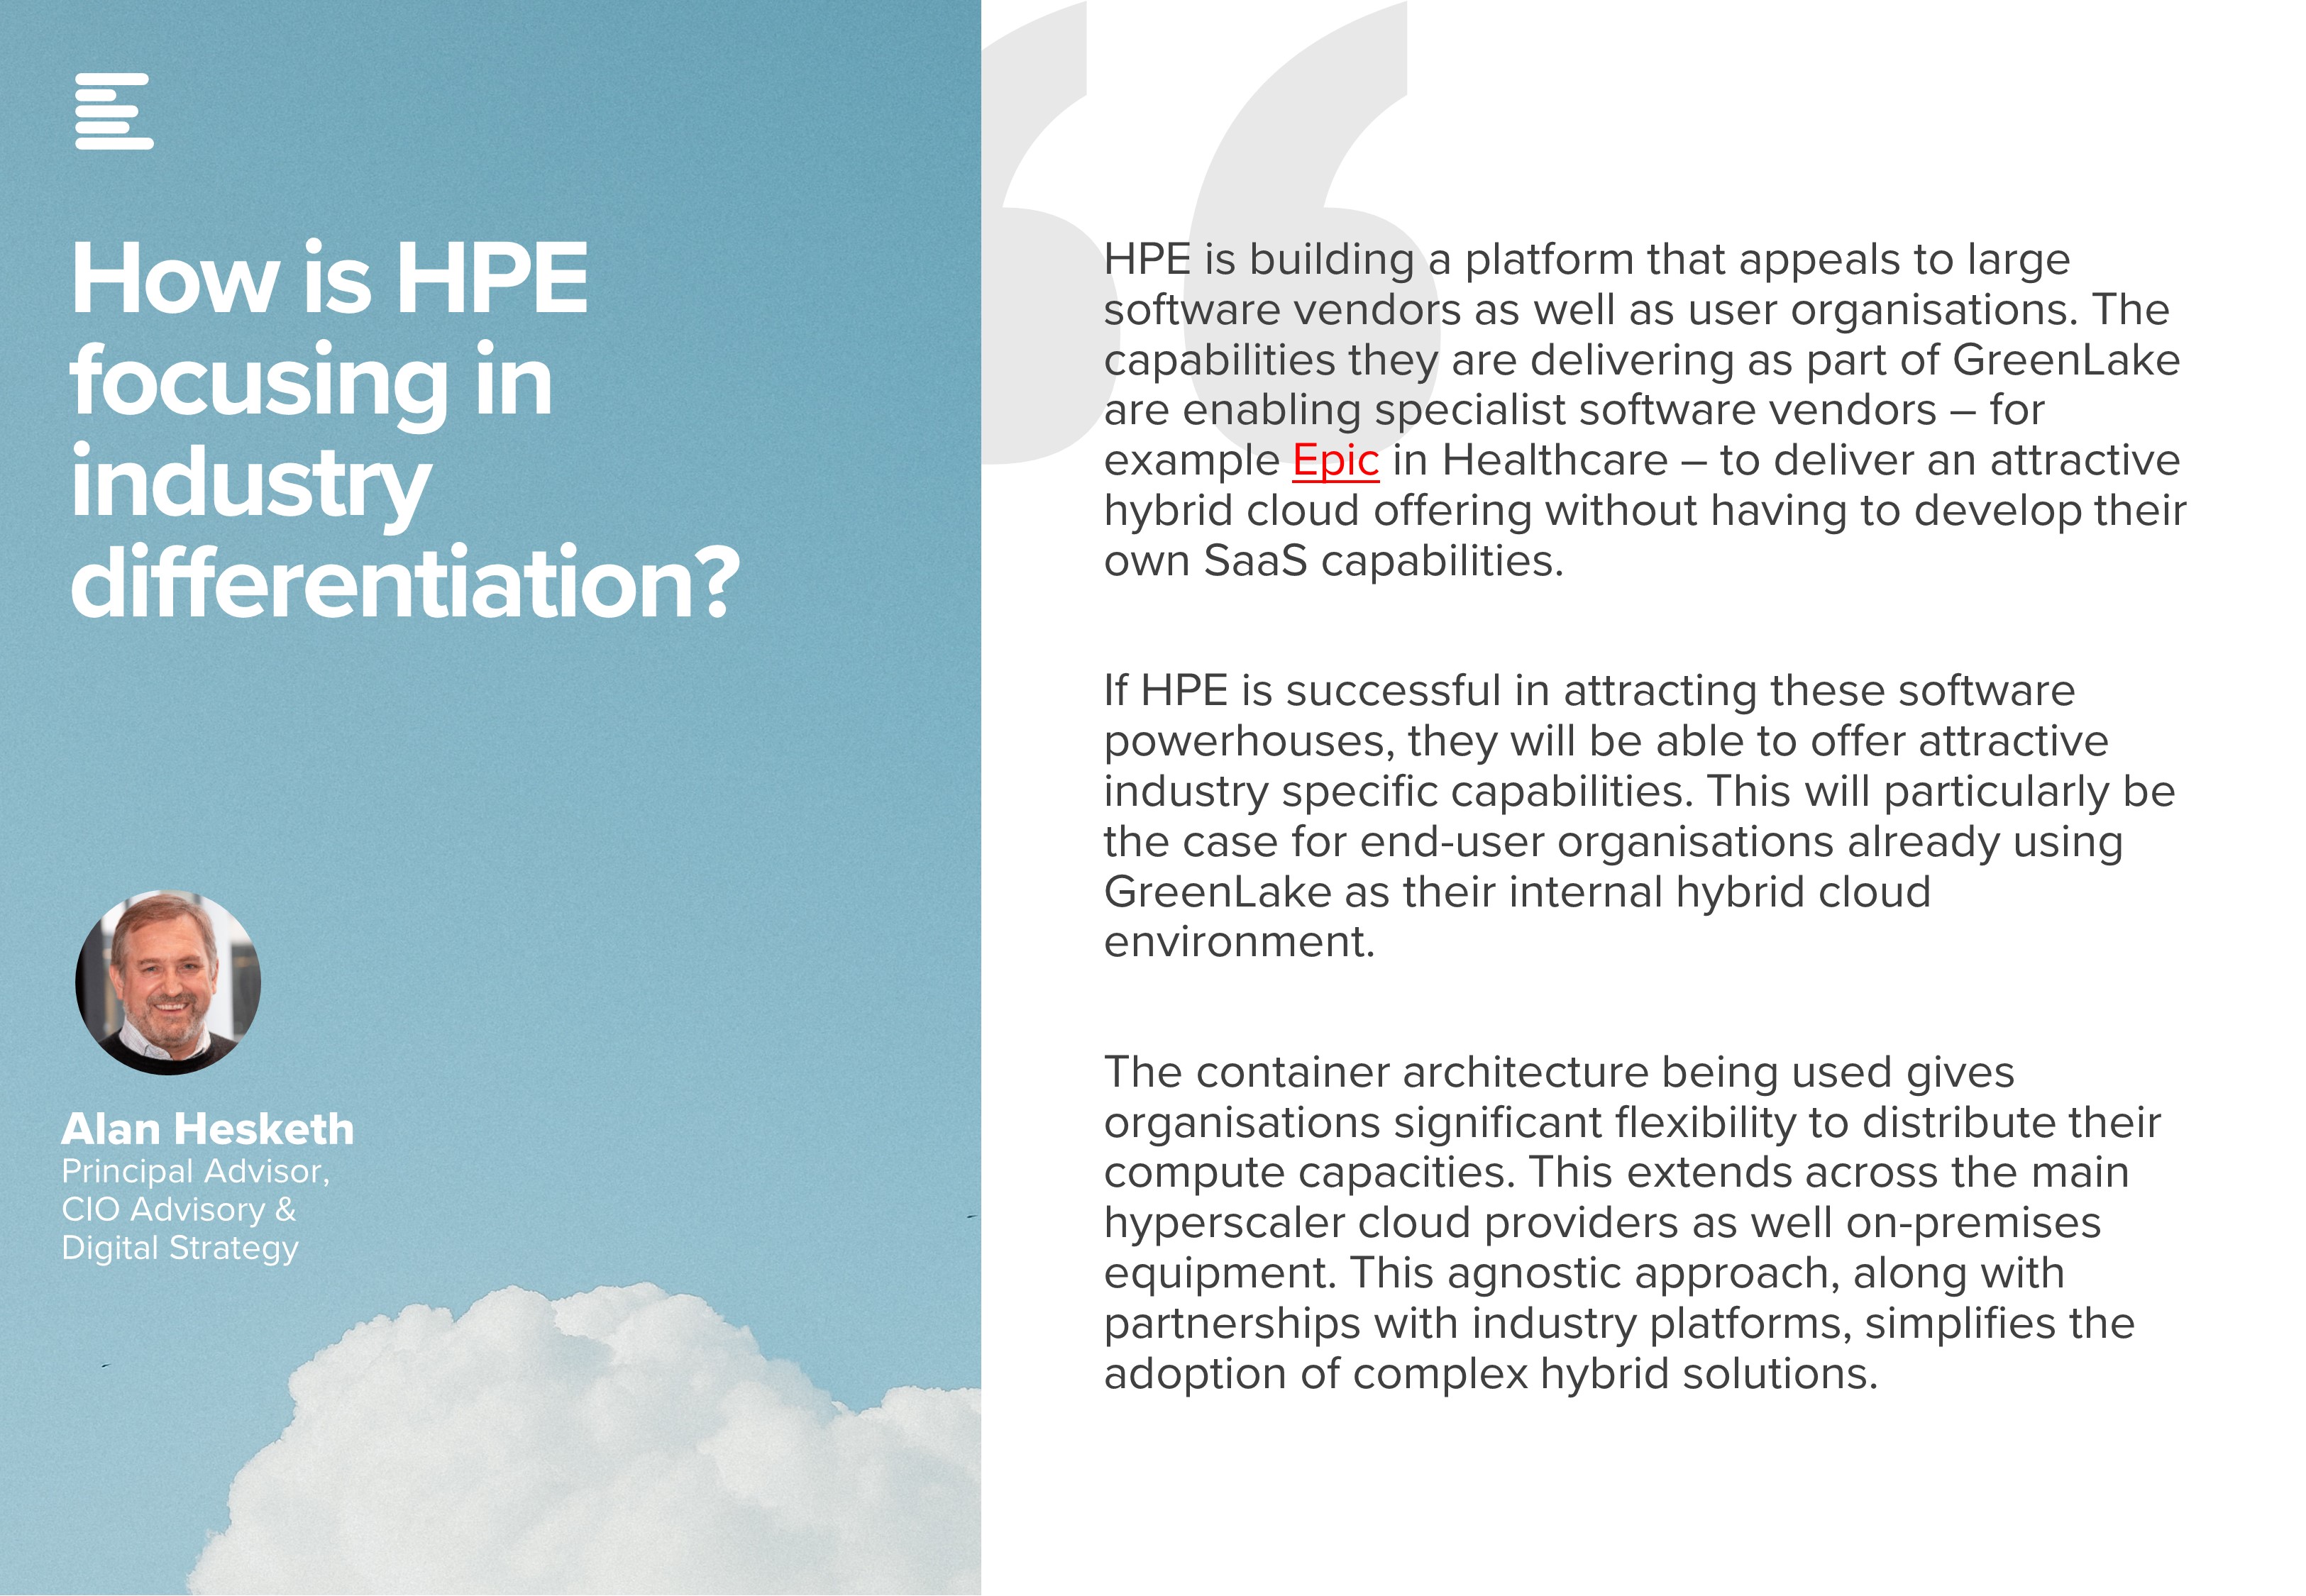 Ecosystm-VendorSphere-HPE-DISCOVER-Edge-to-cloud-roadmap-7